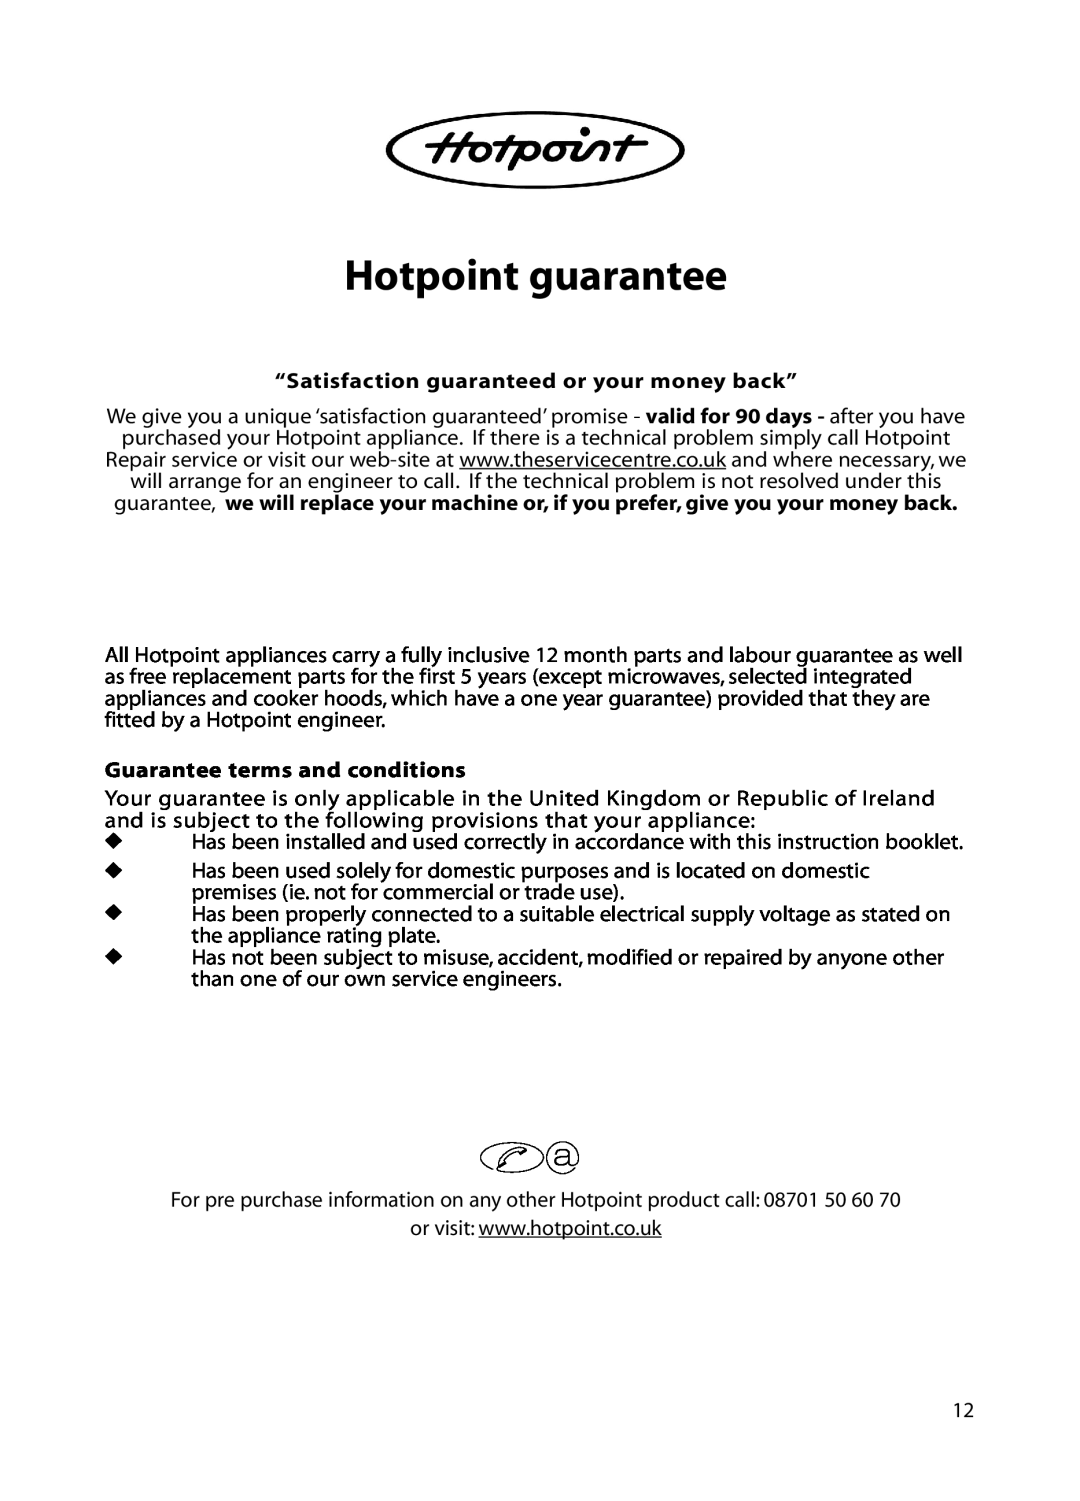 Hotpoint DC 28 manual Hotpoint guarantee, “Satisfaction guaranteed or your money back”, Guarantee terms and conditions 